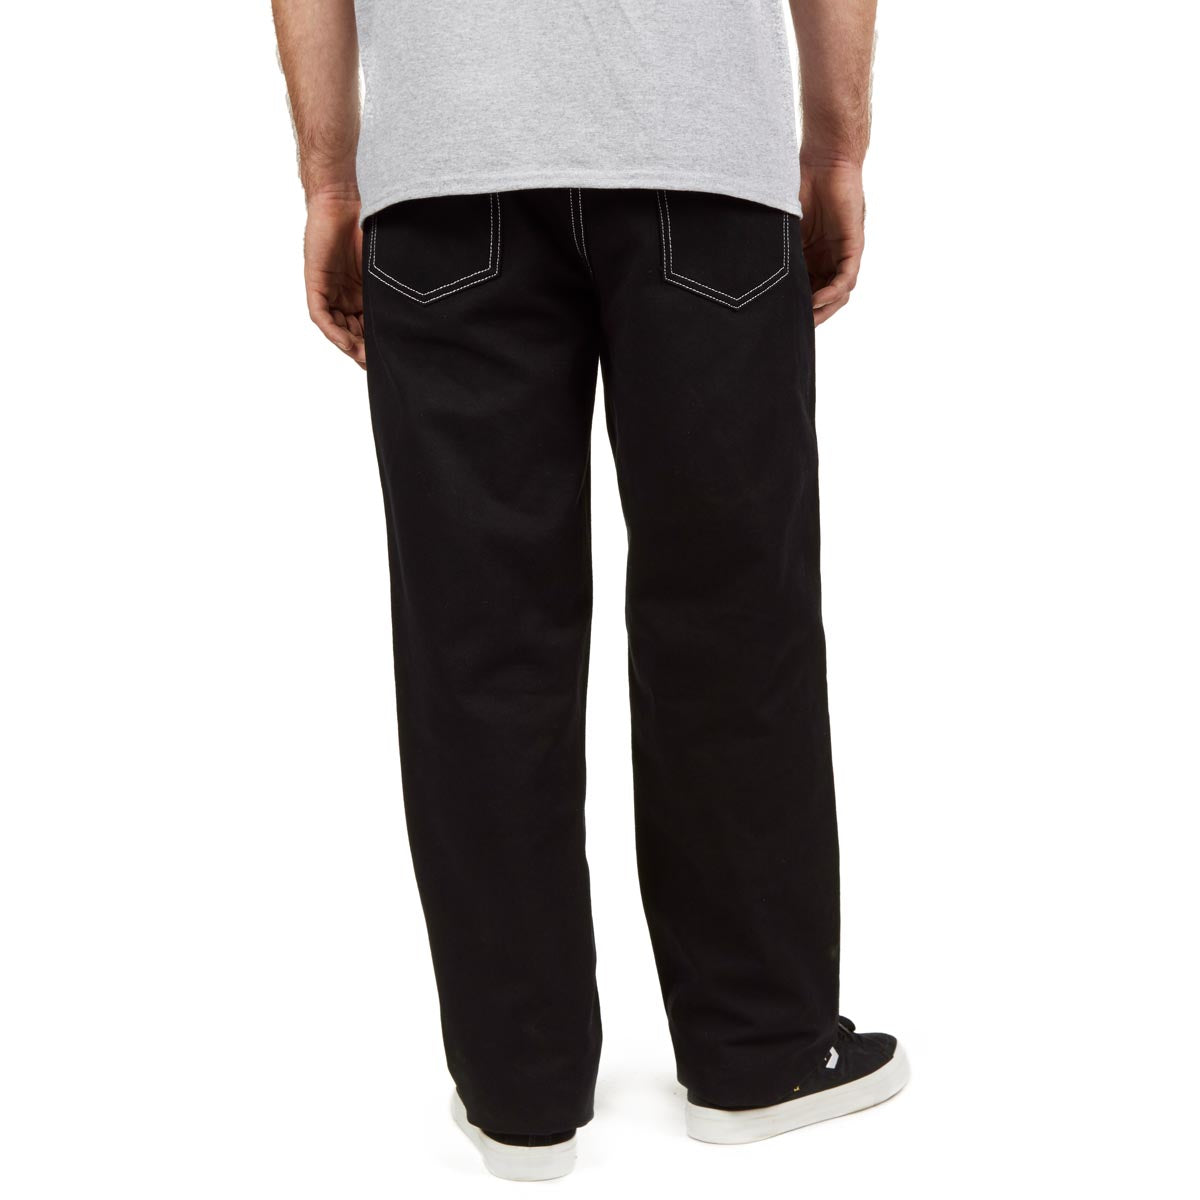 CCS Double Knee Original Relaxed Canvas Pants - Black/White image 2